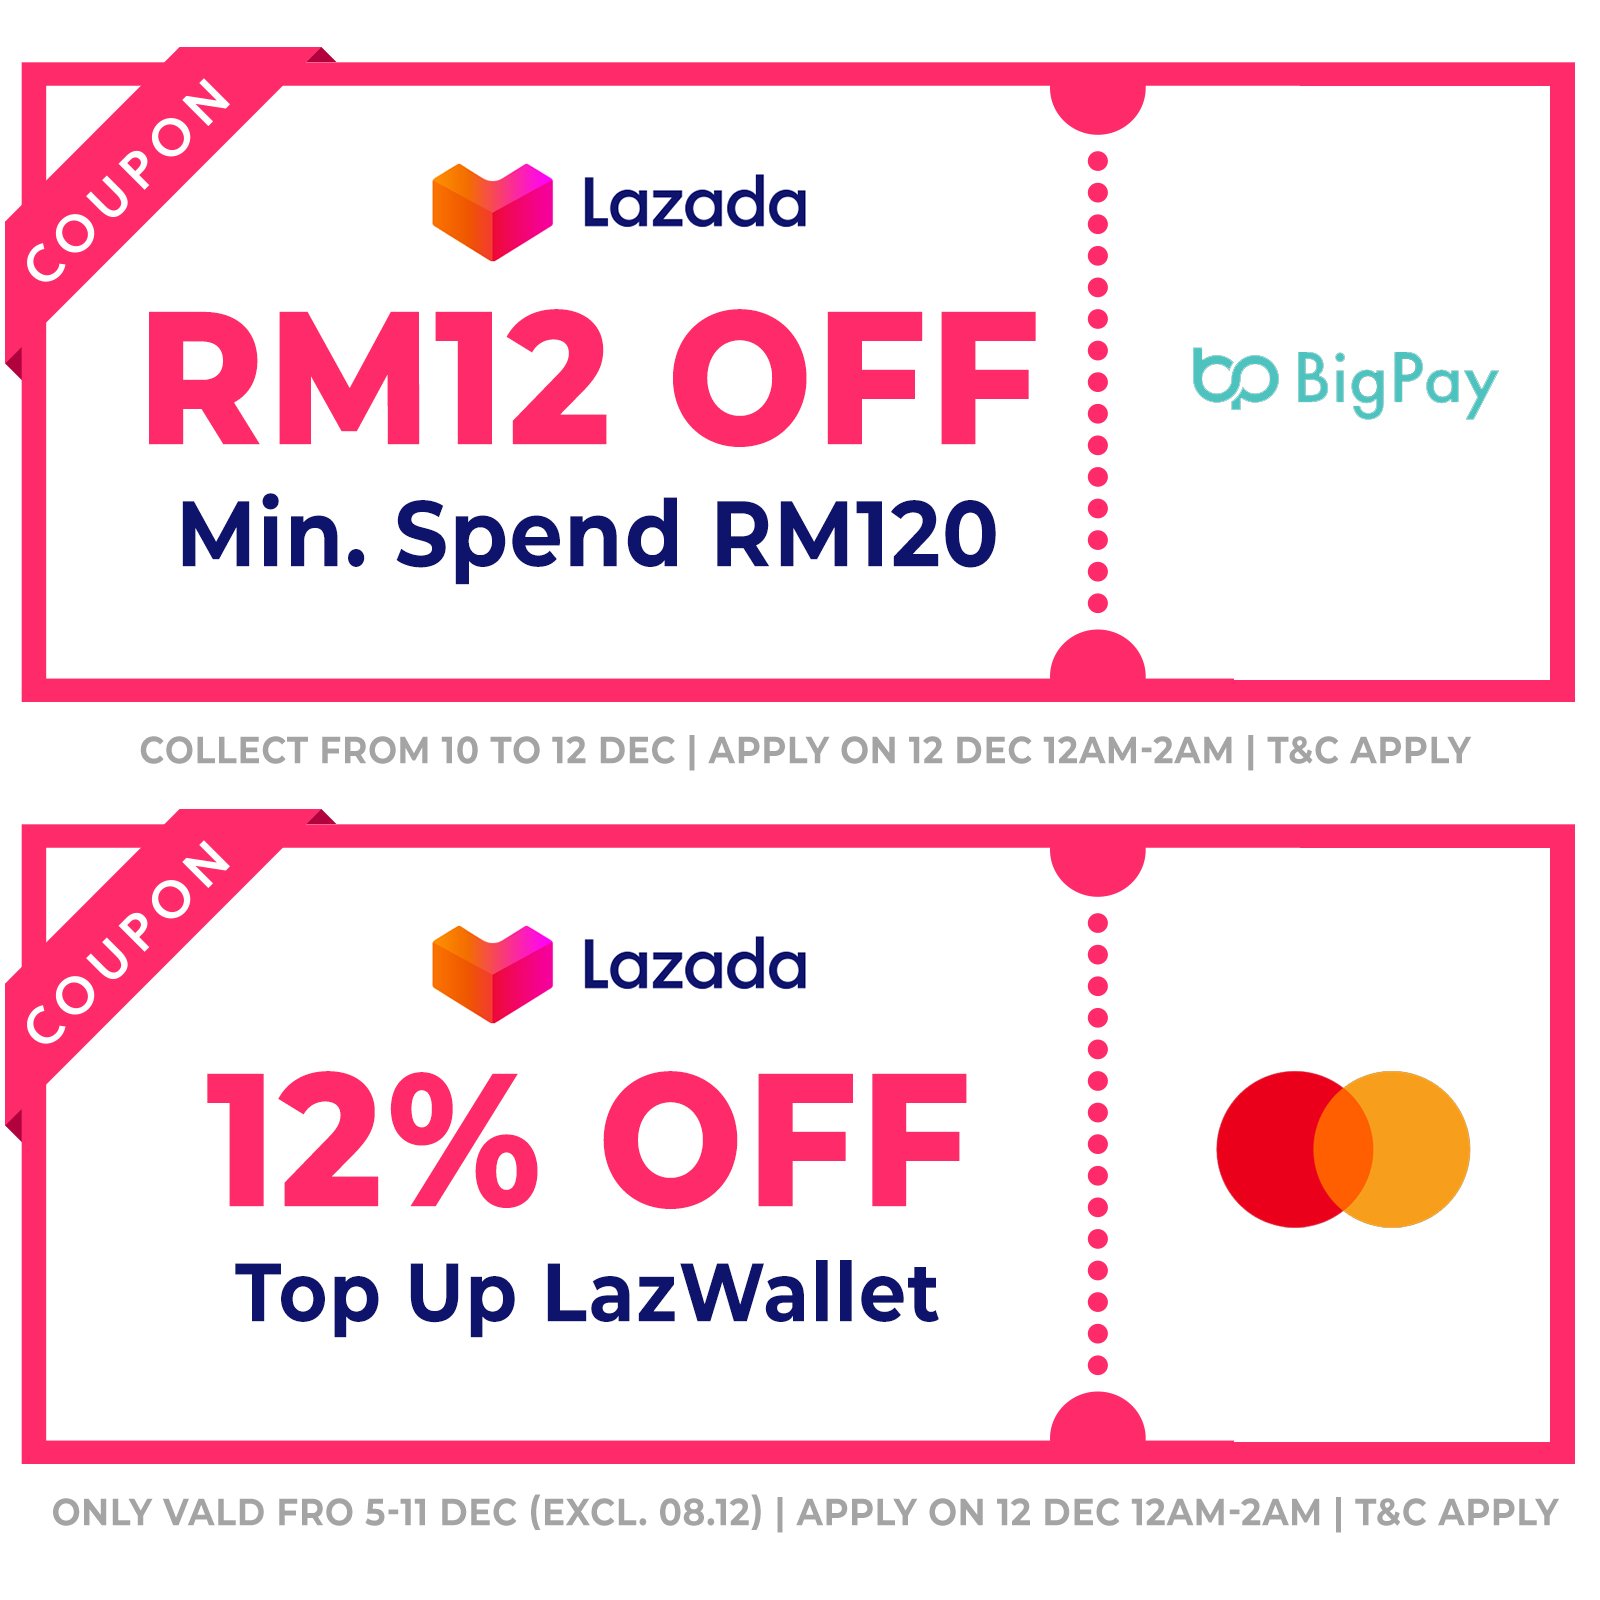 cover-1212-lazada-all-vouchers-bank-code-7